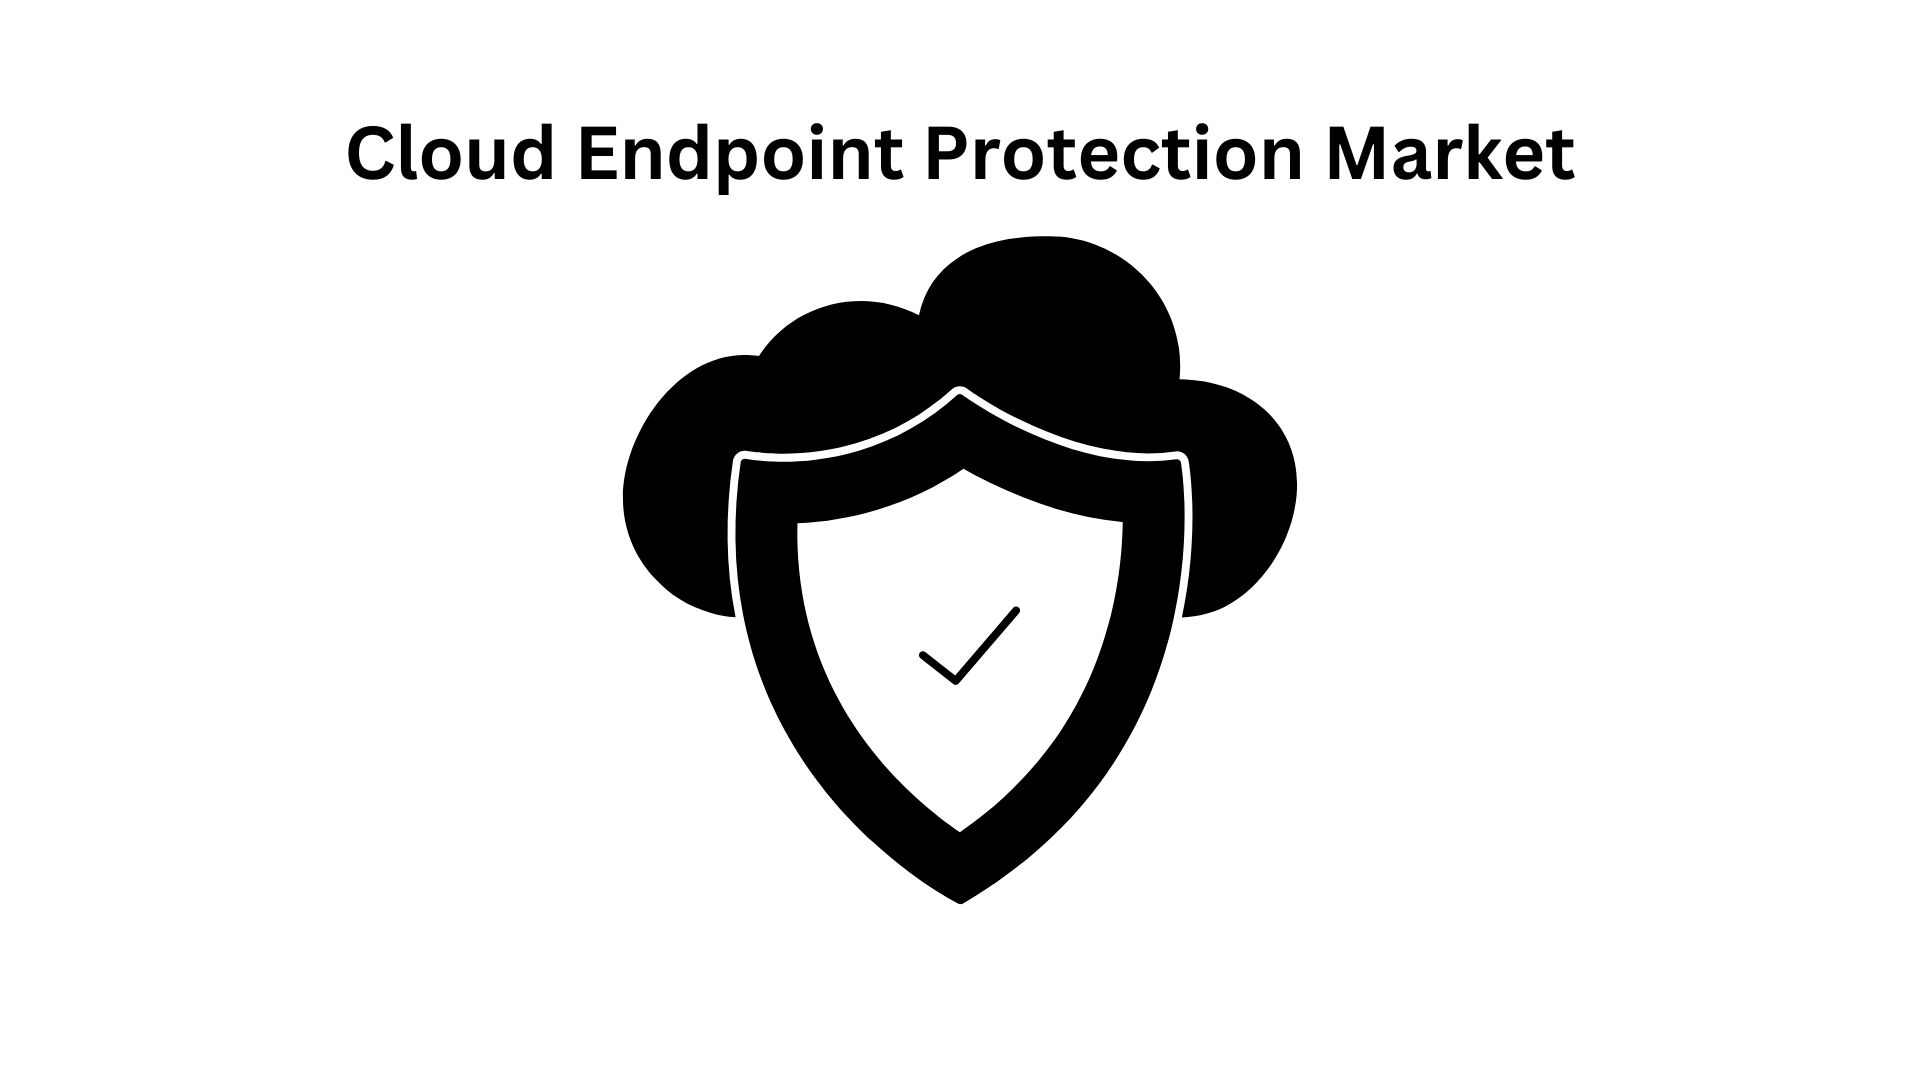 Global Cloud Endpoint Protection Market is expected to reach USD 7.19 Bn by 2033 | CAGR 13.1%